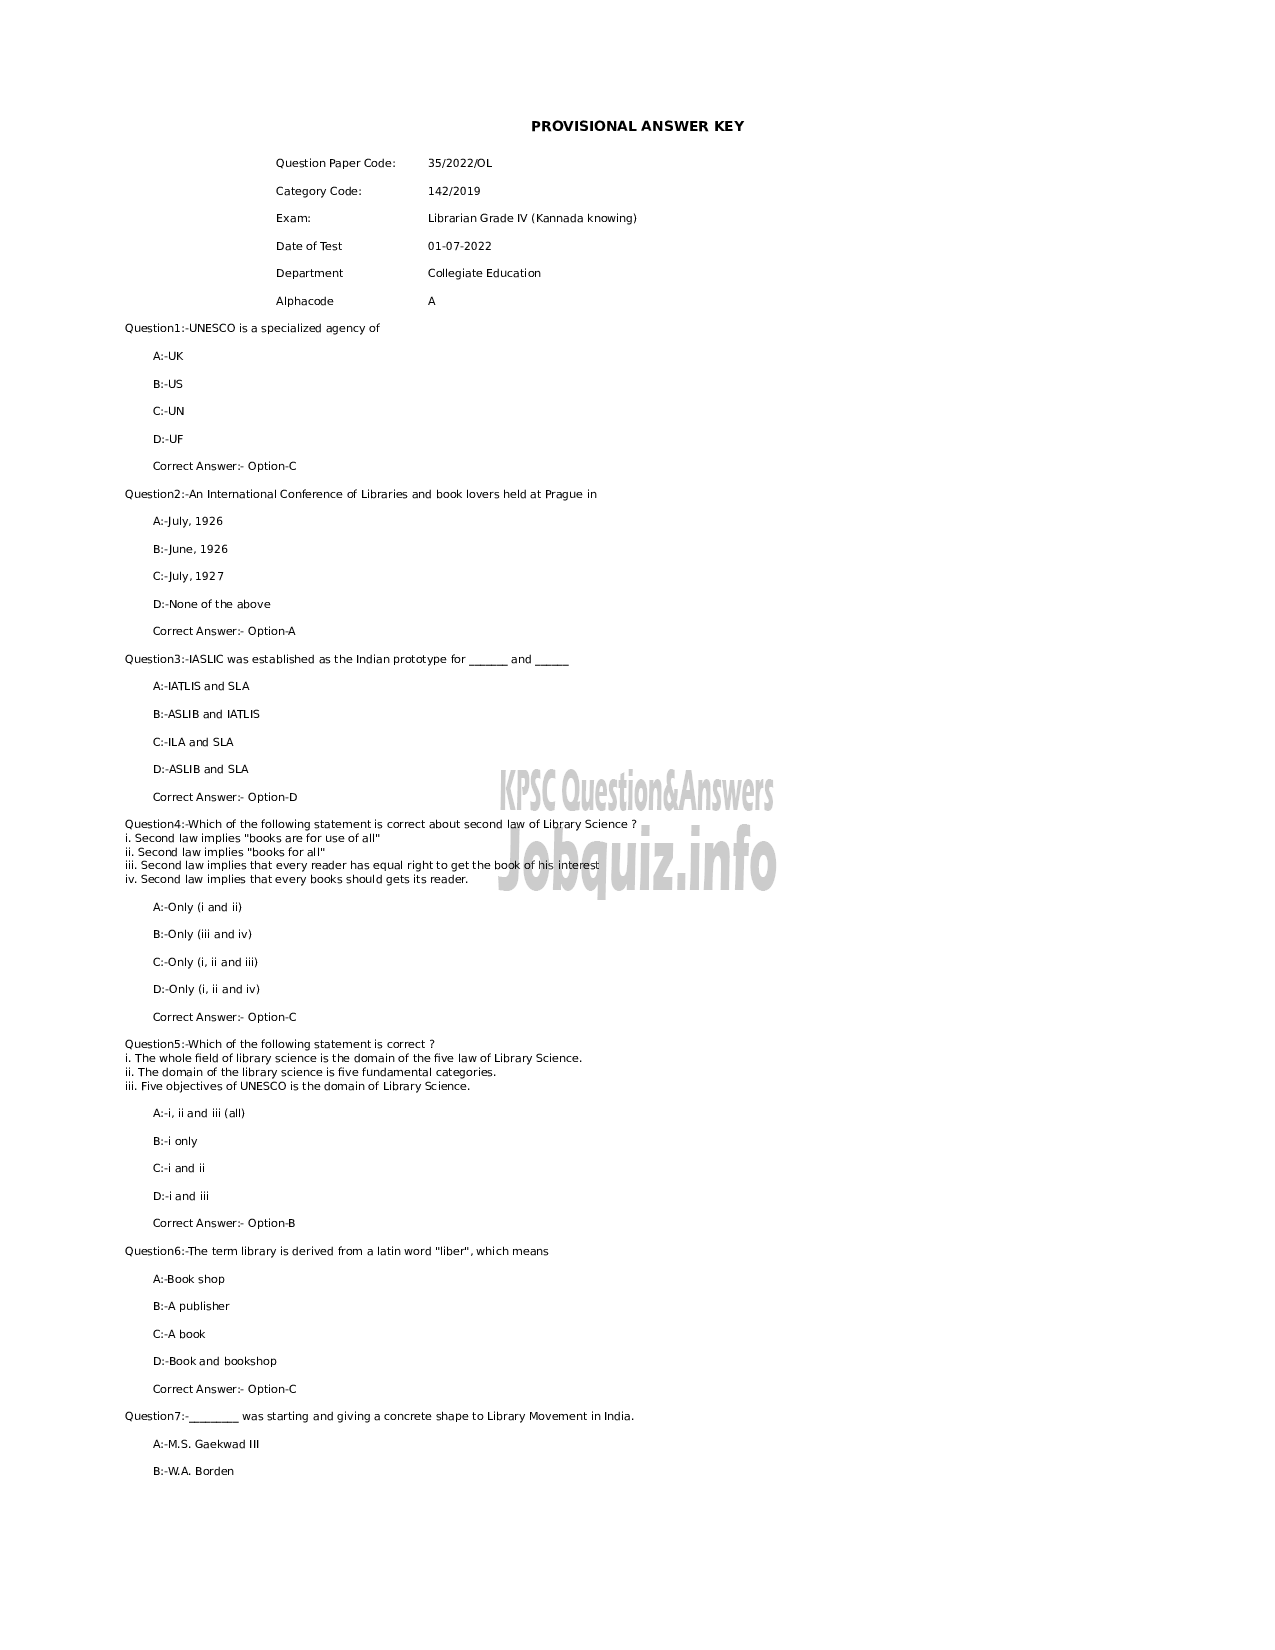 Kerala PSC Question Paper -  Librarian Grade IV (Kannada knowing) - Collegiate Education-1